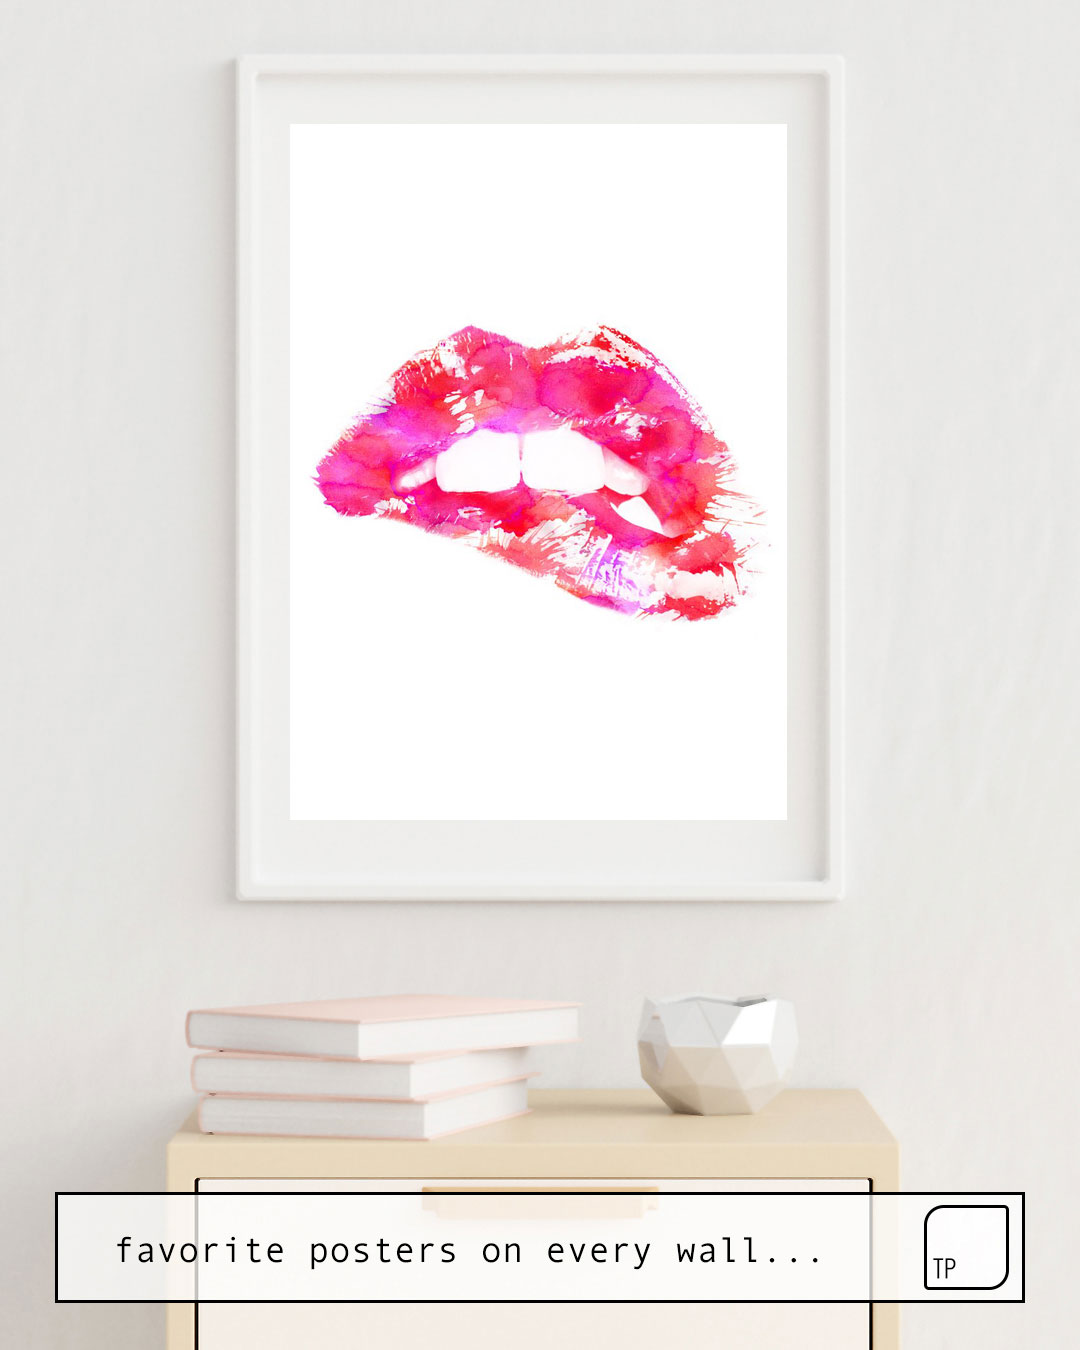 The photo shows an example of furnishing with the motif PINK LIPS by Andreas Lie as mural